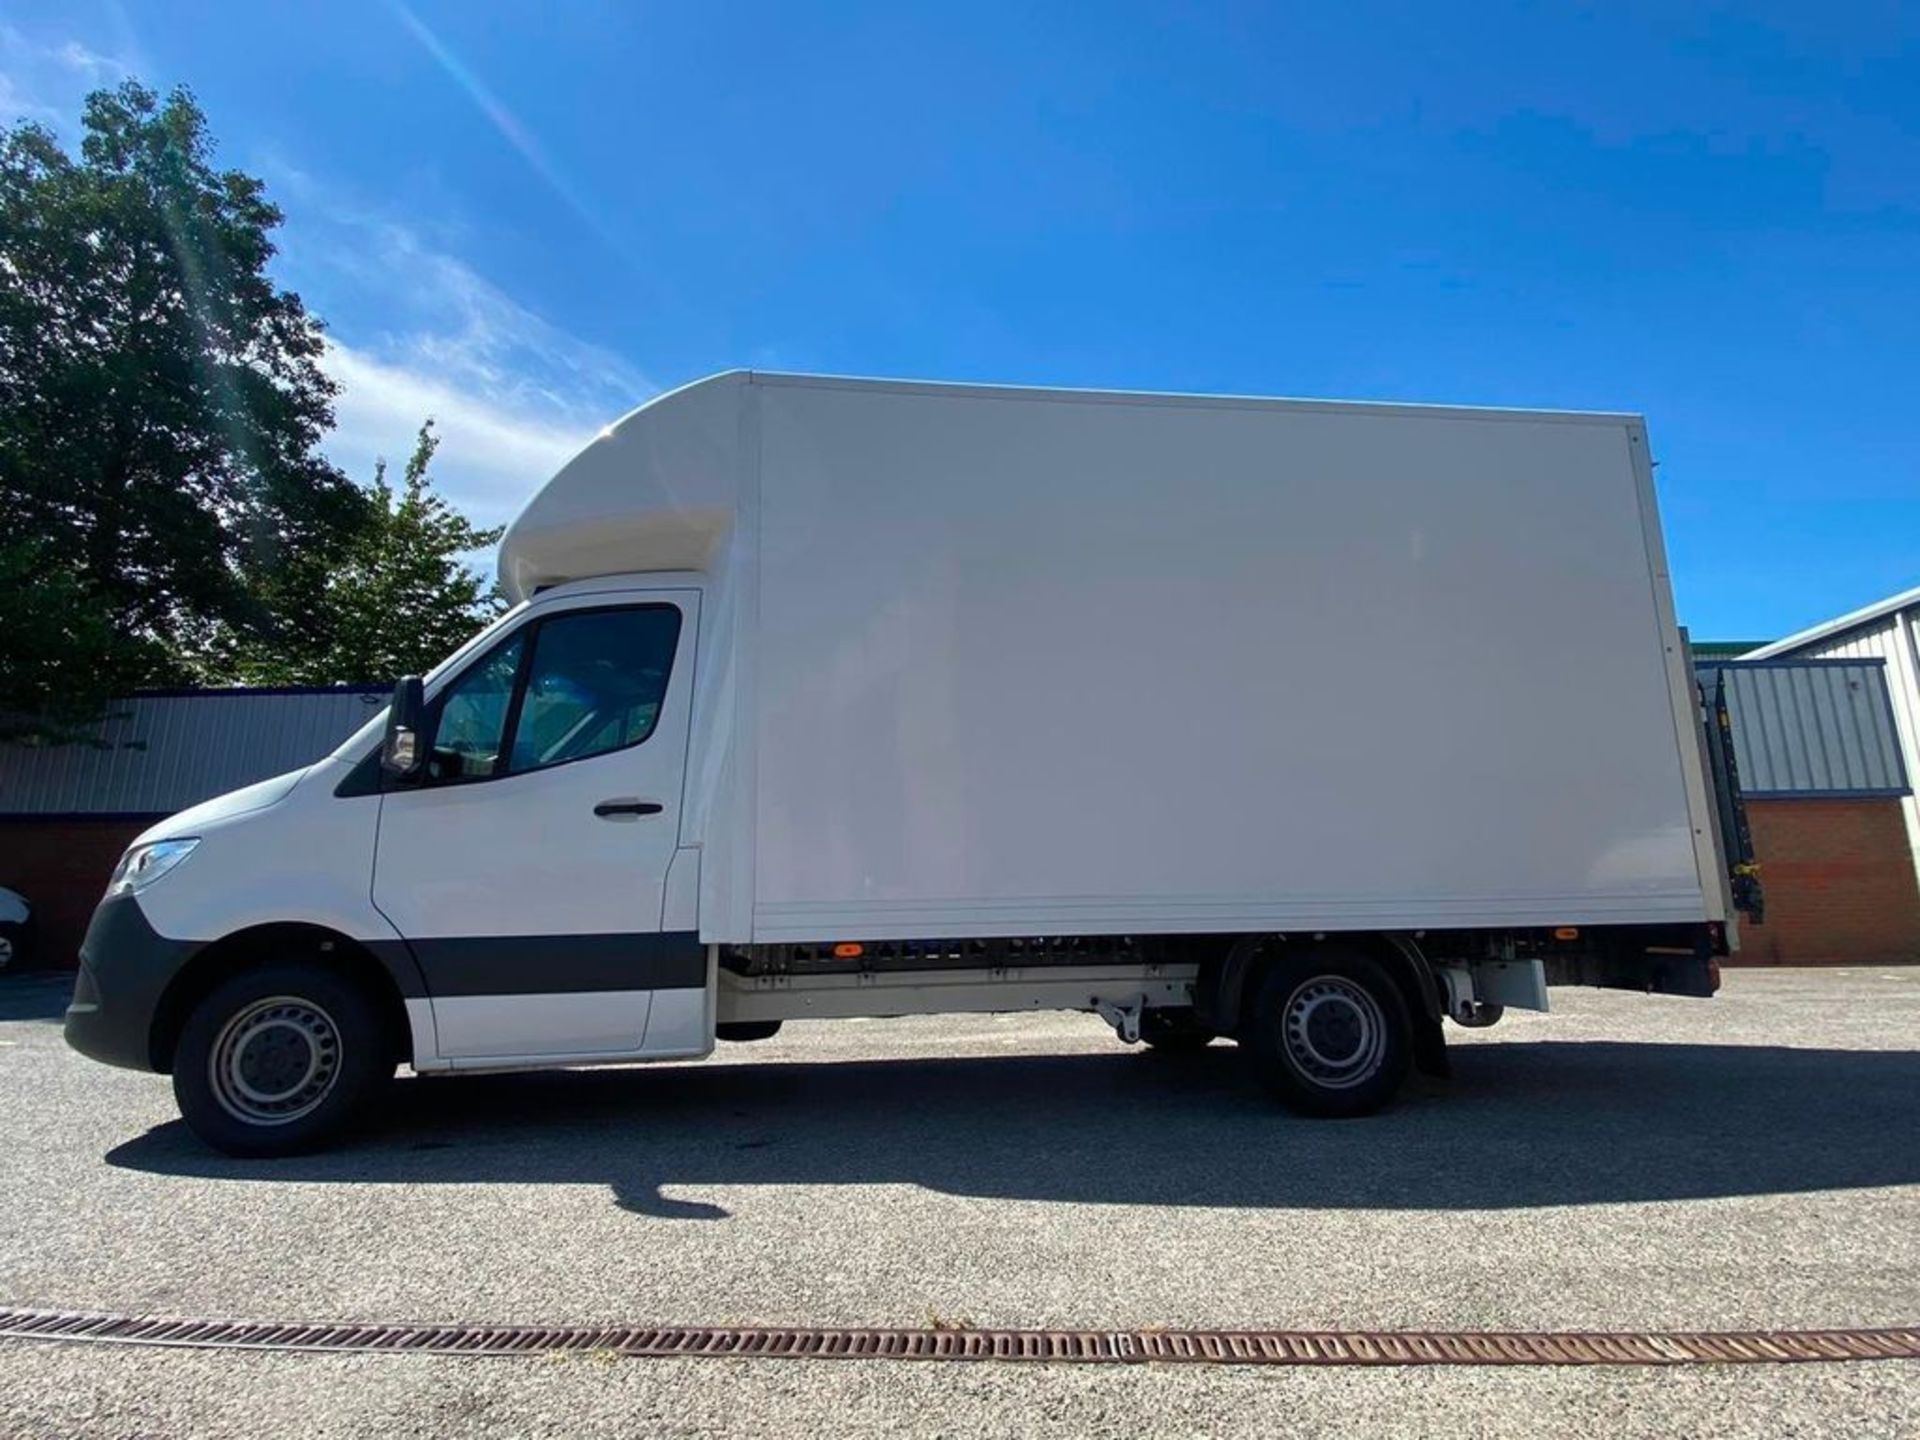 (RESERVE MET)Mercedes Sprinter 314Cdi LWB Luton Body with TL - 2020 20 Reg 1 Owner - New Shape - Image 3 of 8